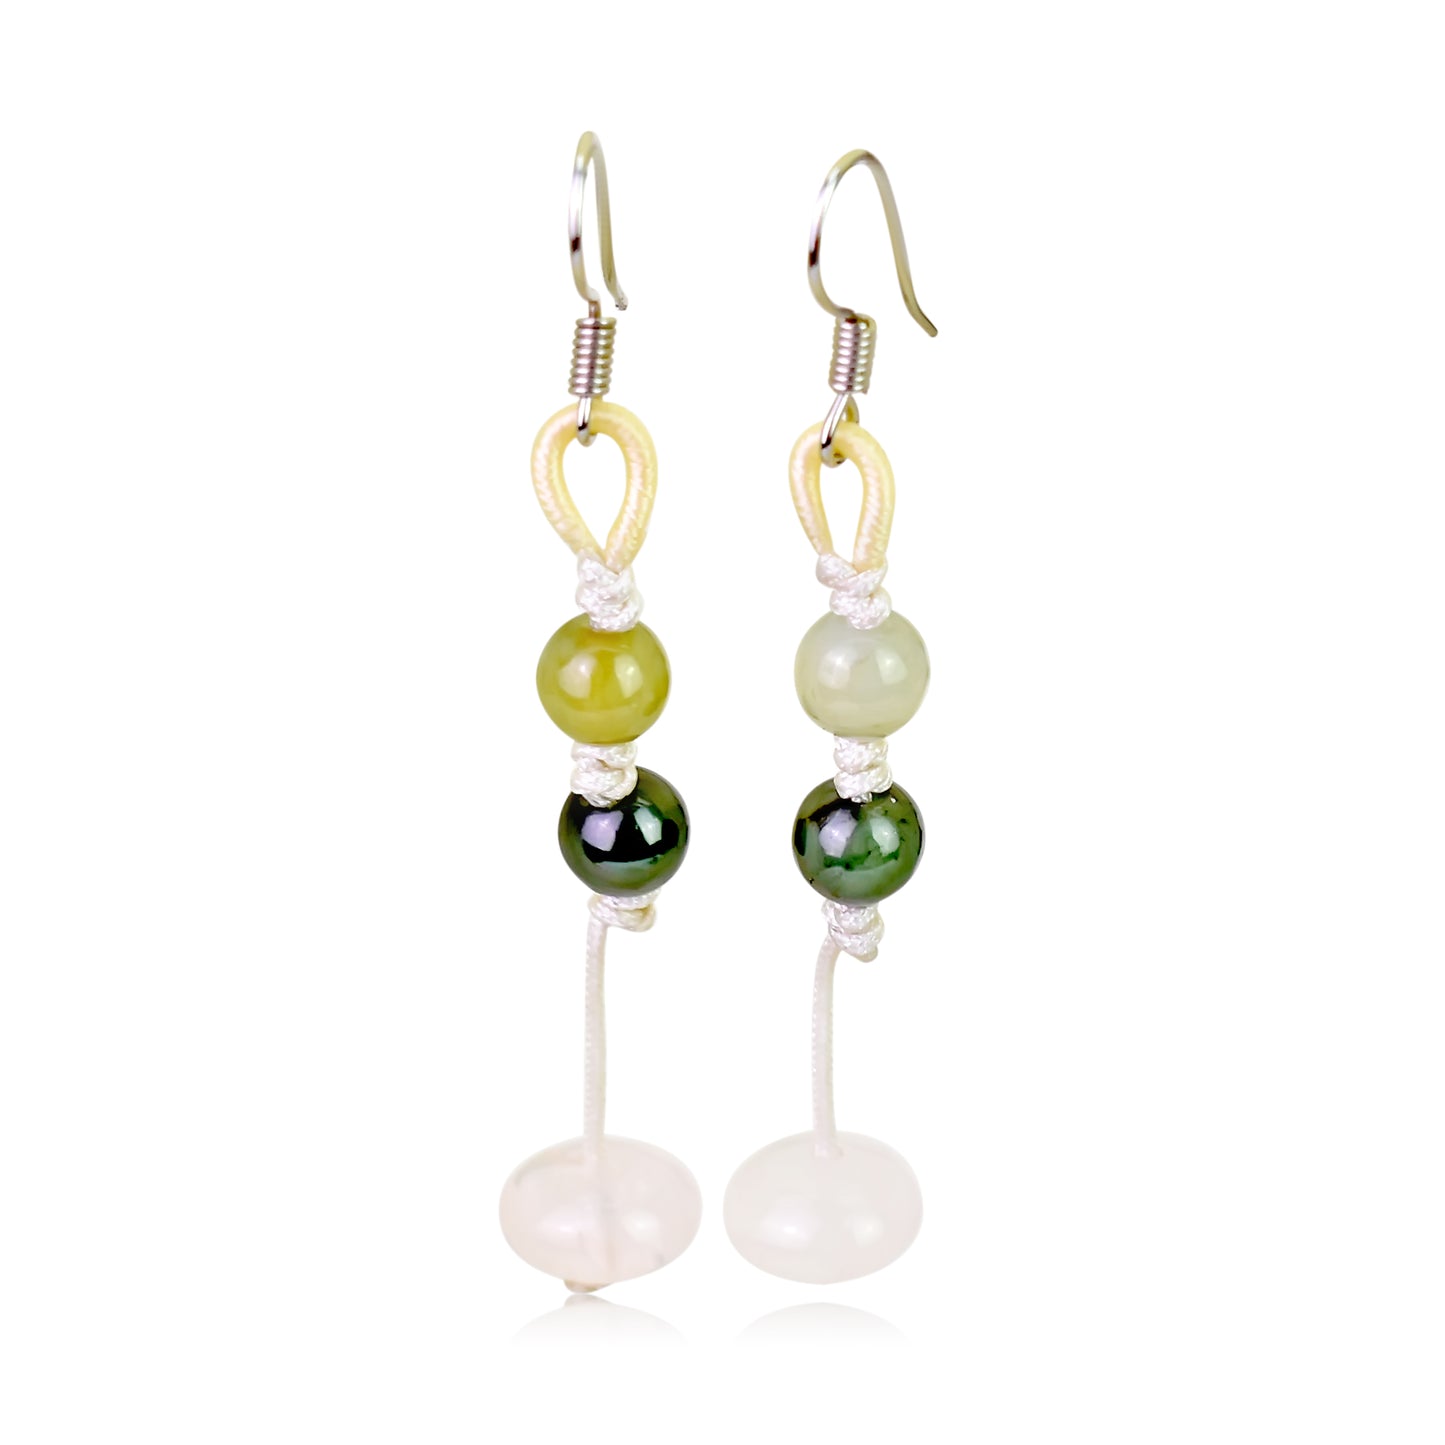 Get the Perfect Pair of Subtle Elegance with Spherical Beads Earrings made with White Cord